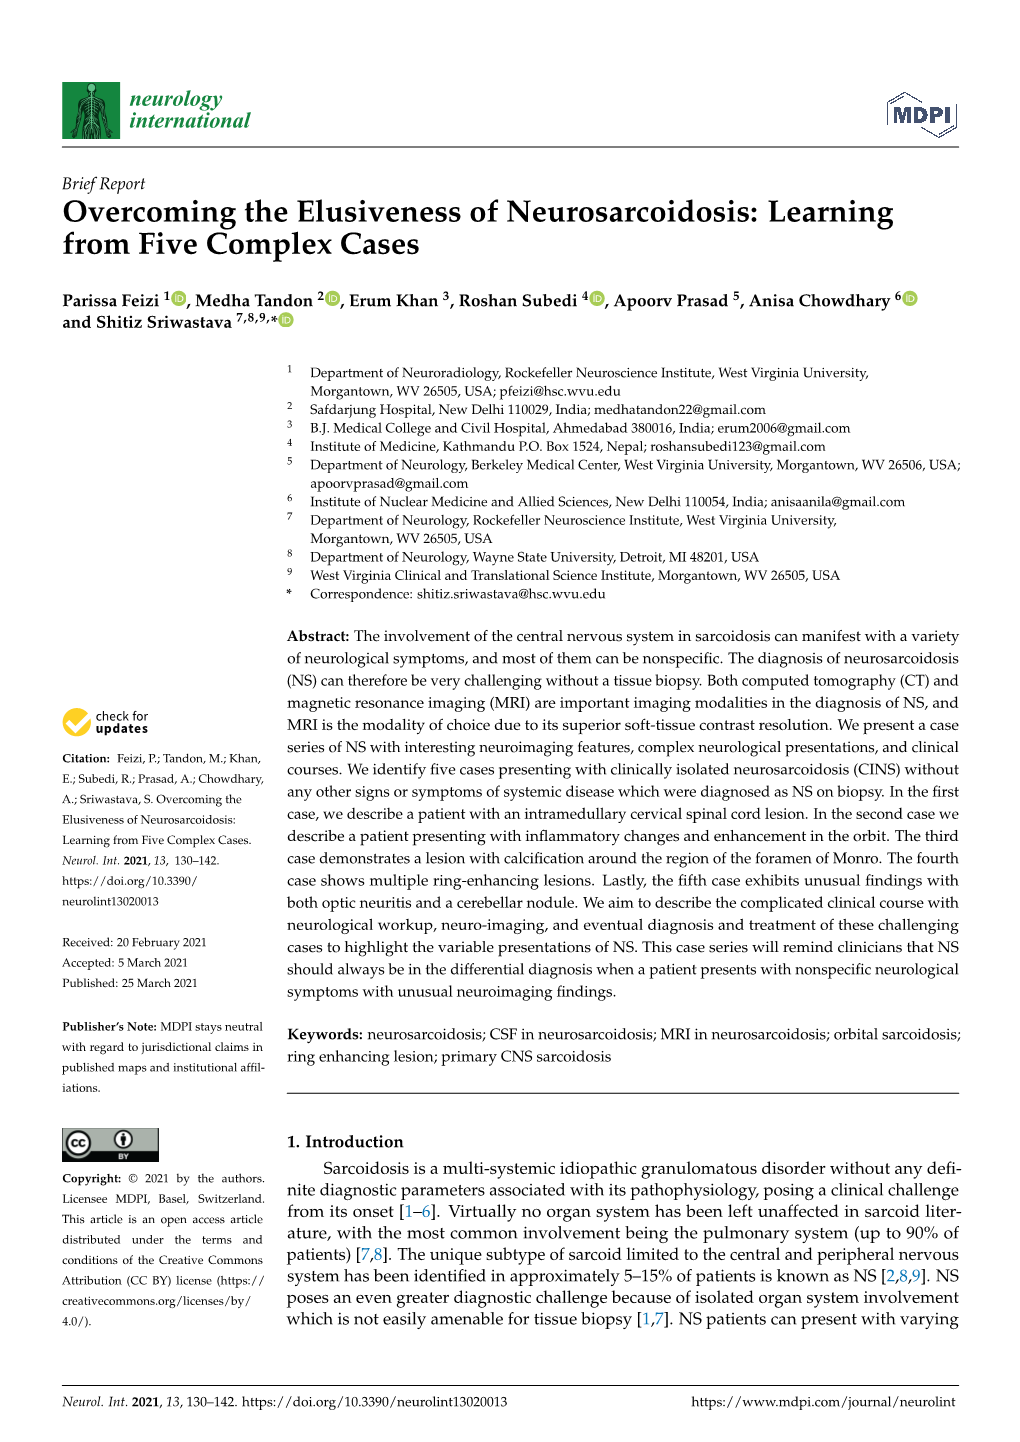 Overcoming the Elusiveness of Neurosarcoidosis: Learning from Five Complex Cases